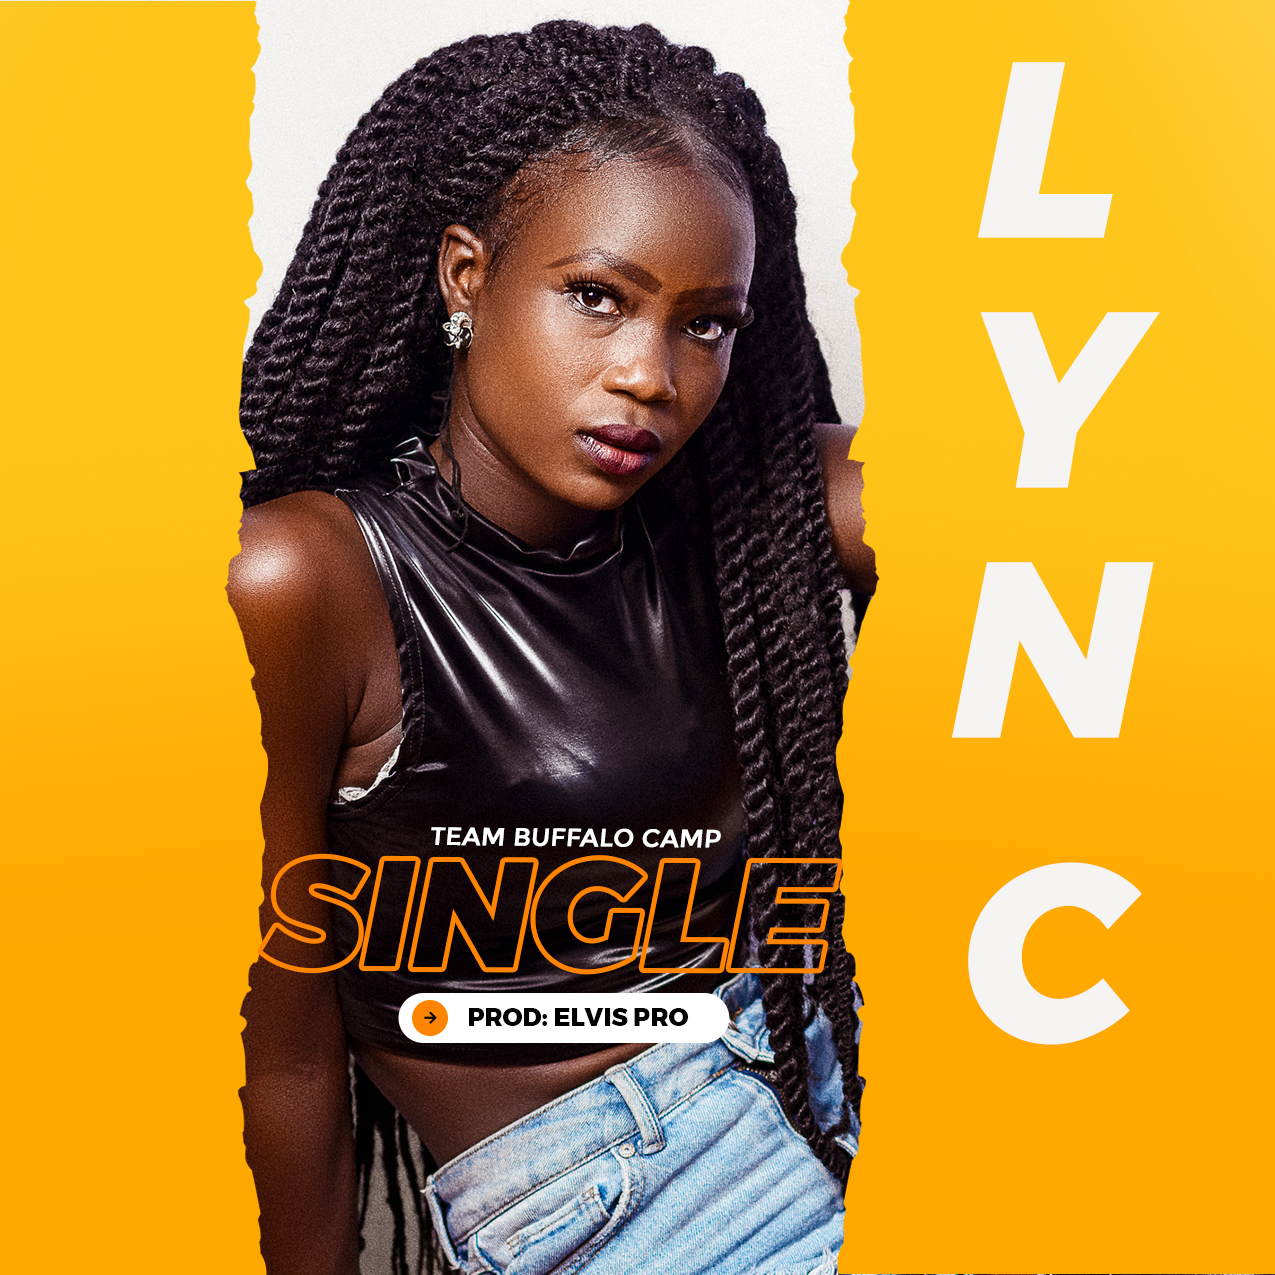 LYN C announces the release date of her brand new song (SINGLE)